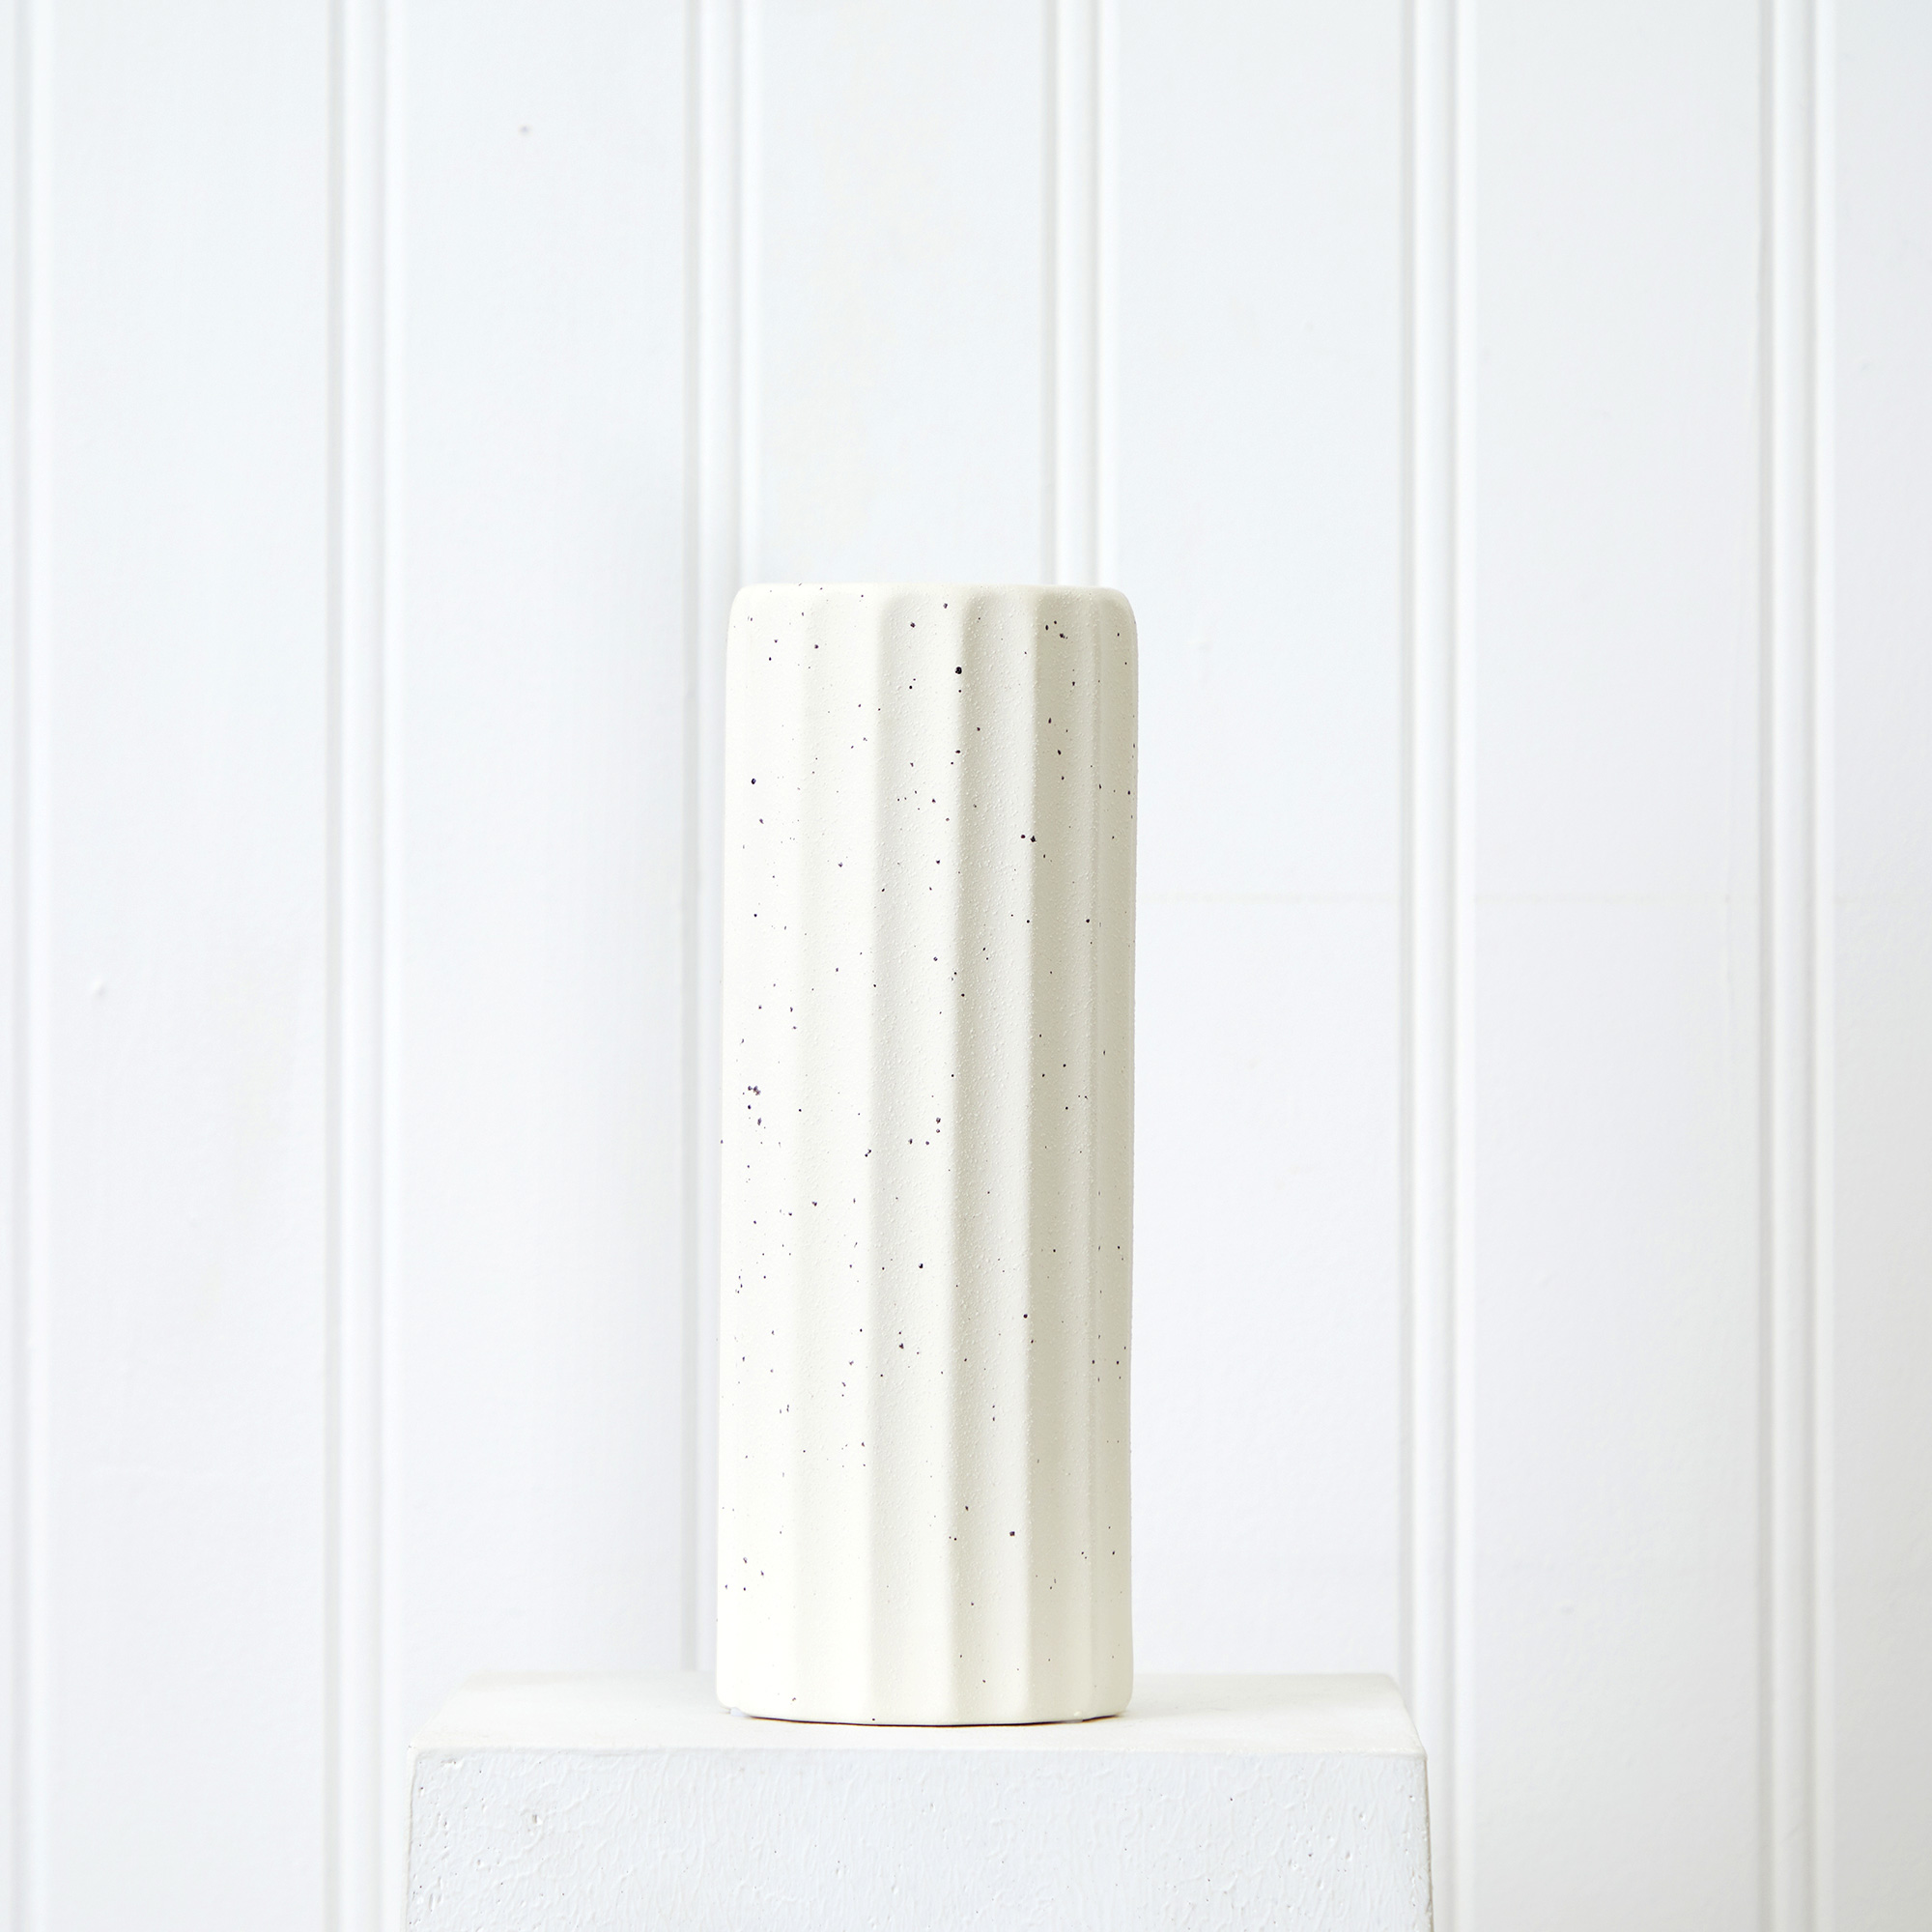 Mainstays 12" White Speckled Wavy Textured Stone Vase - image 5 of 5